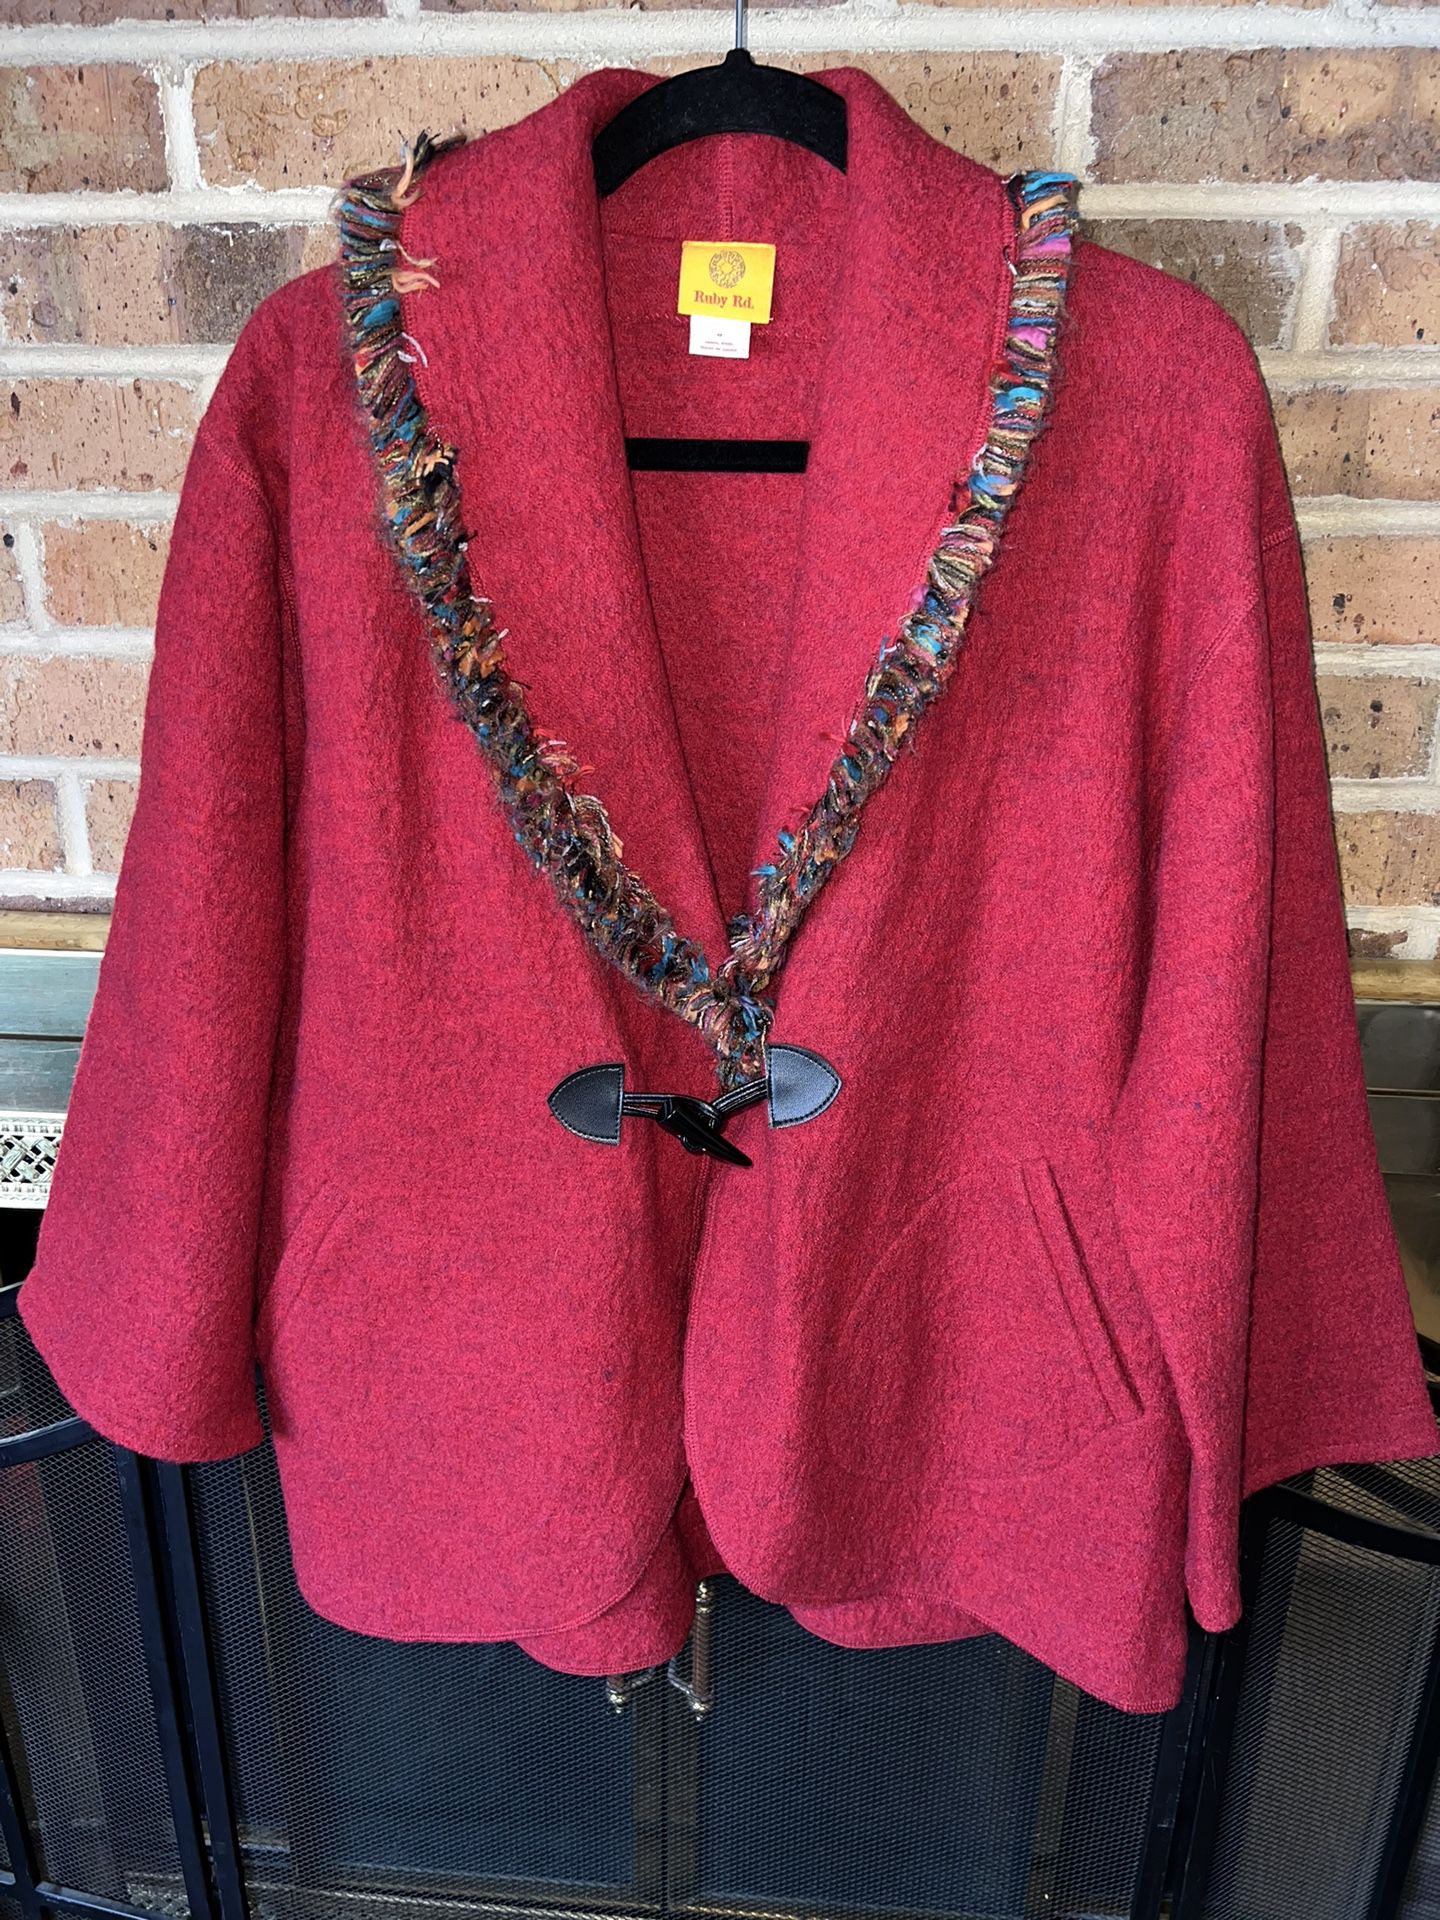 Ruby Rd Red poncho-like jacket with colorful fringe detail